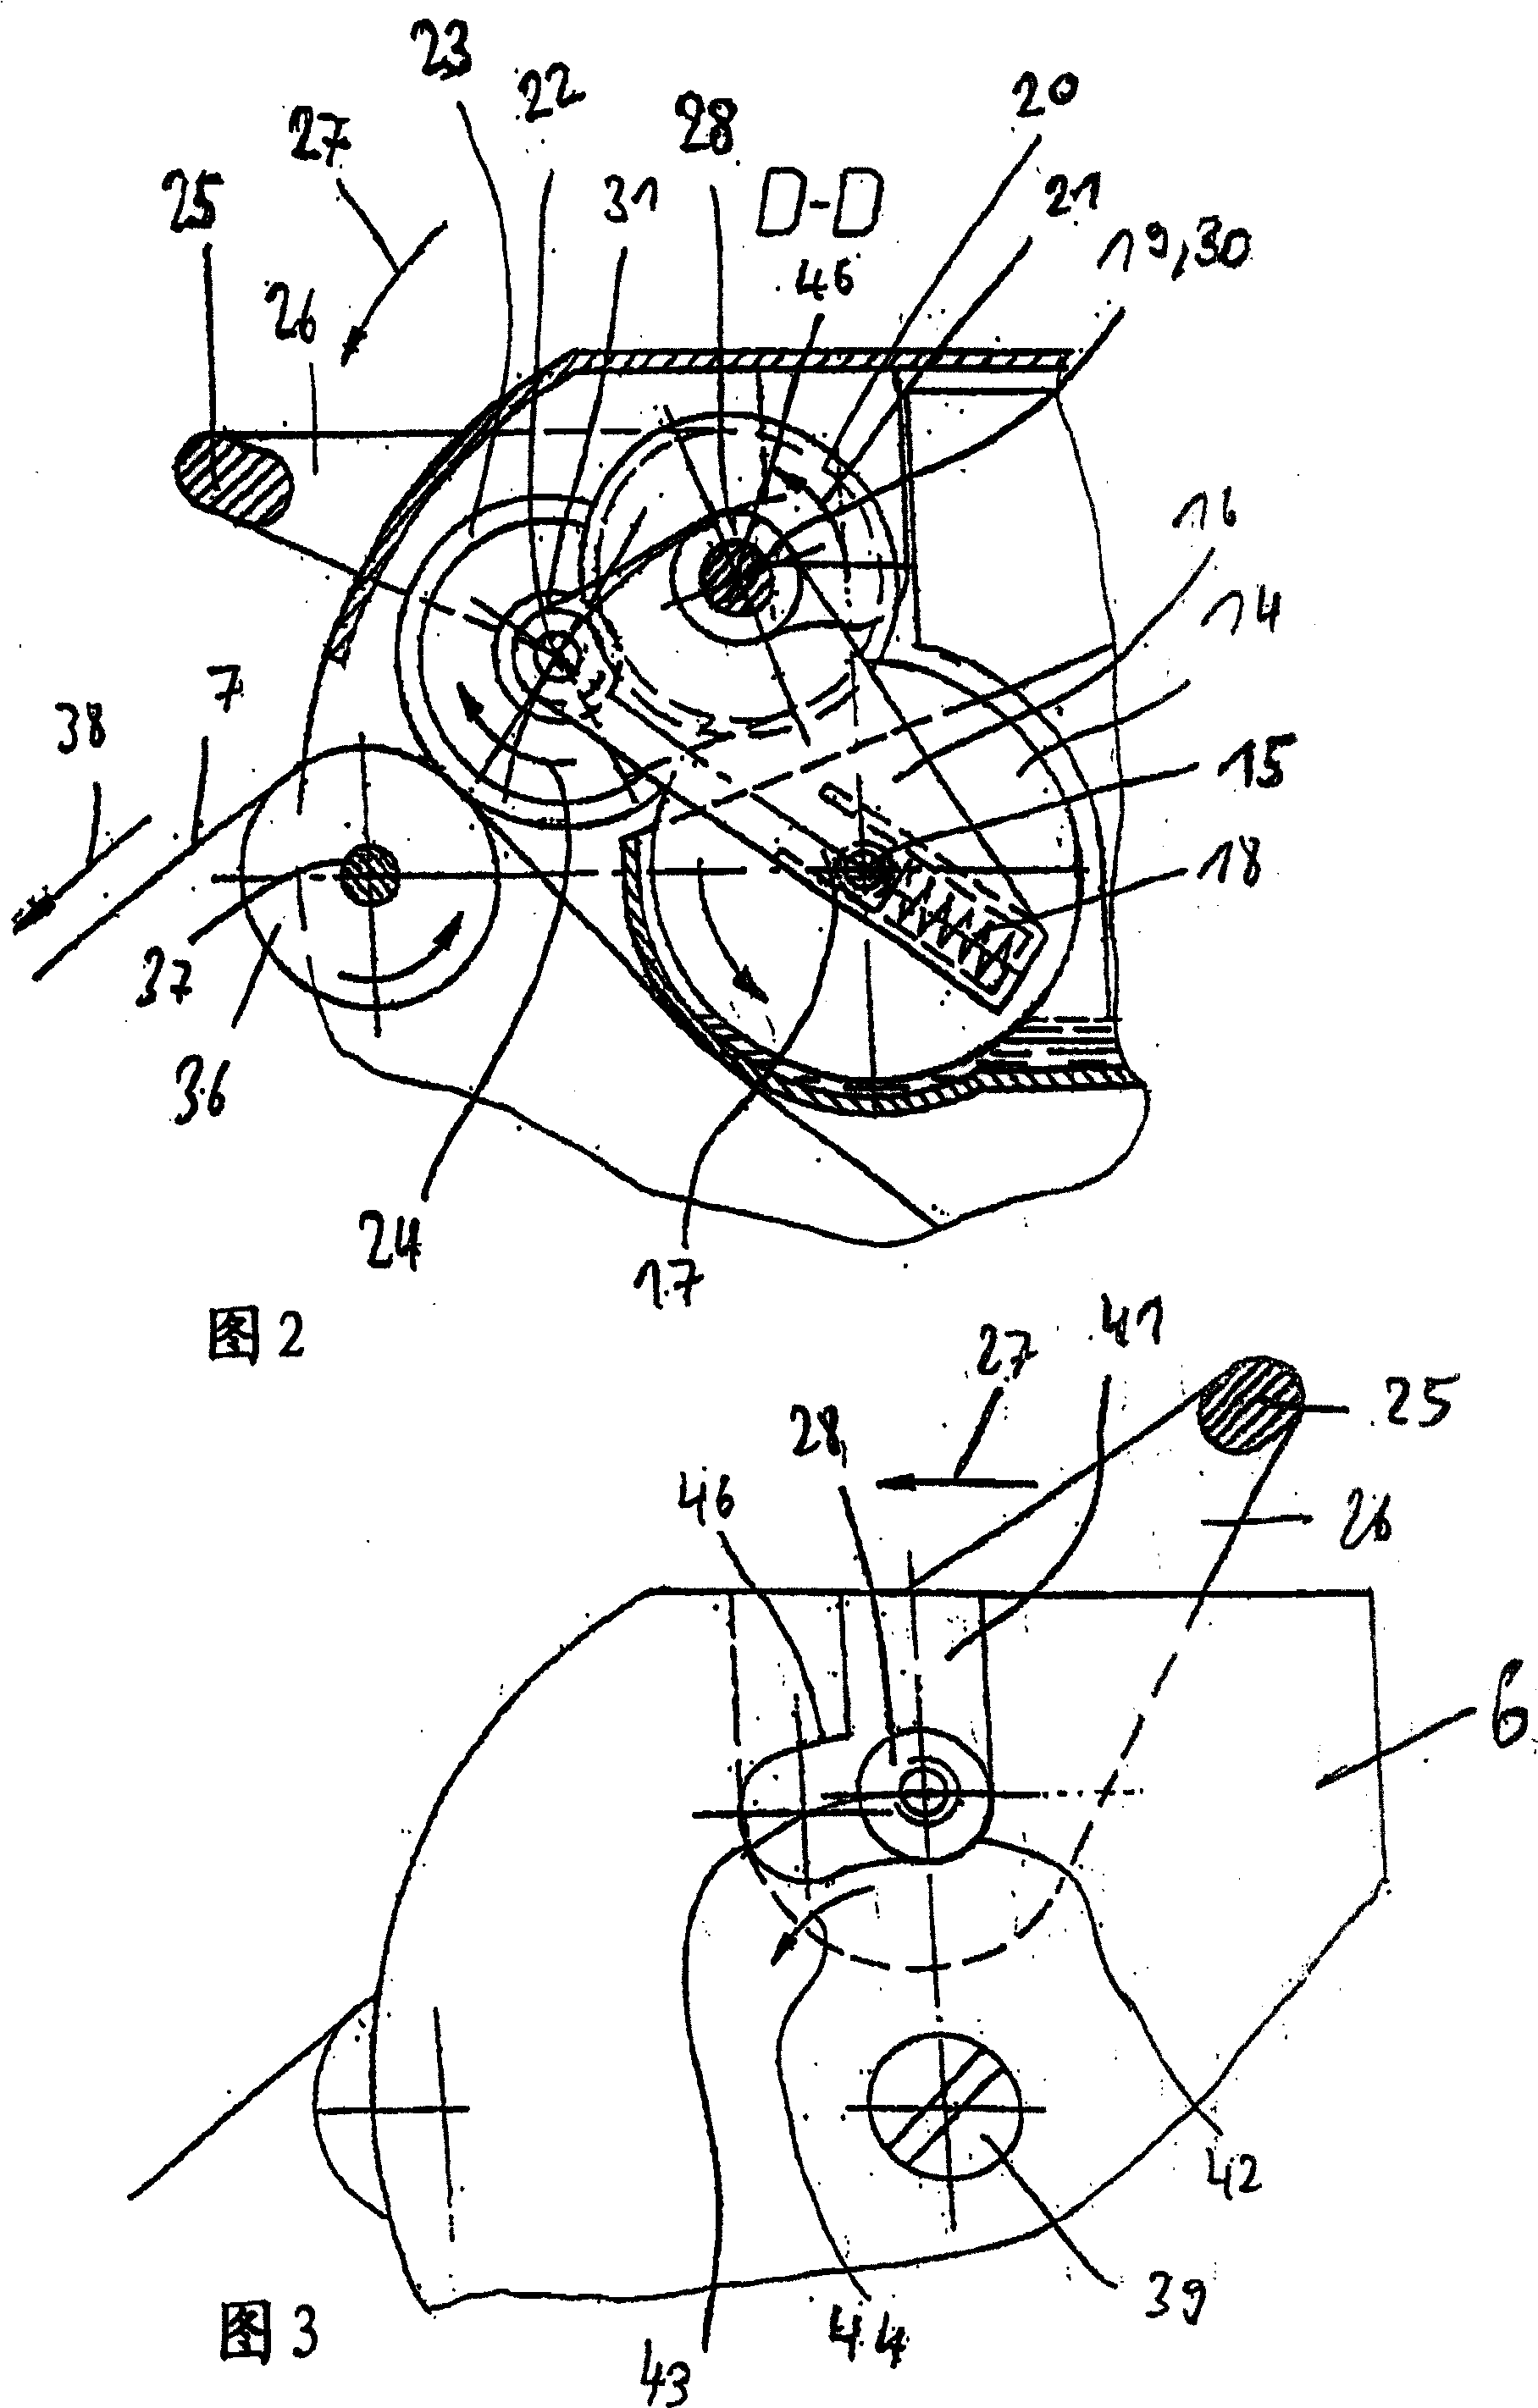 Paper dispenser for optional delivery of saturated or dry paper